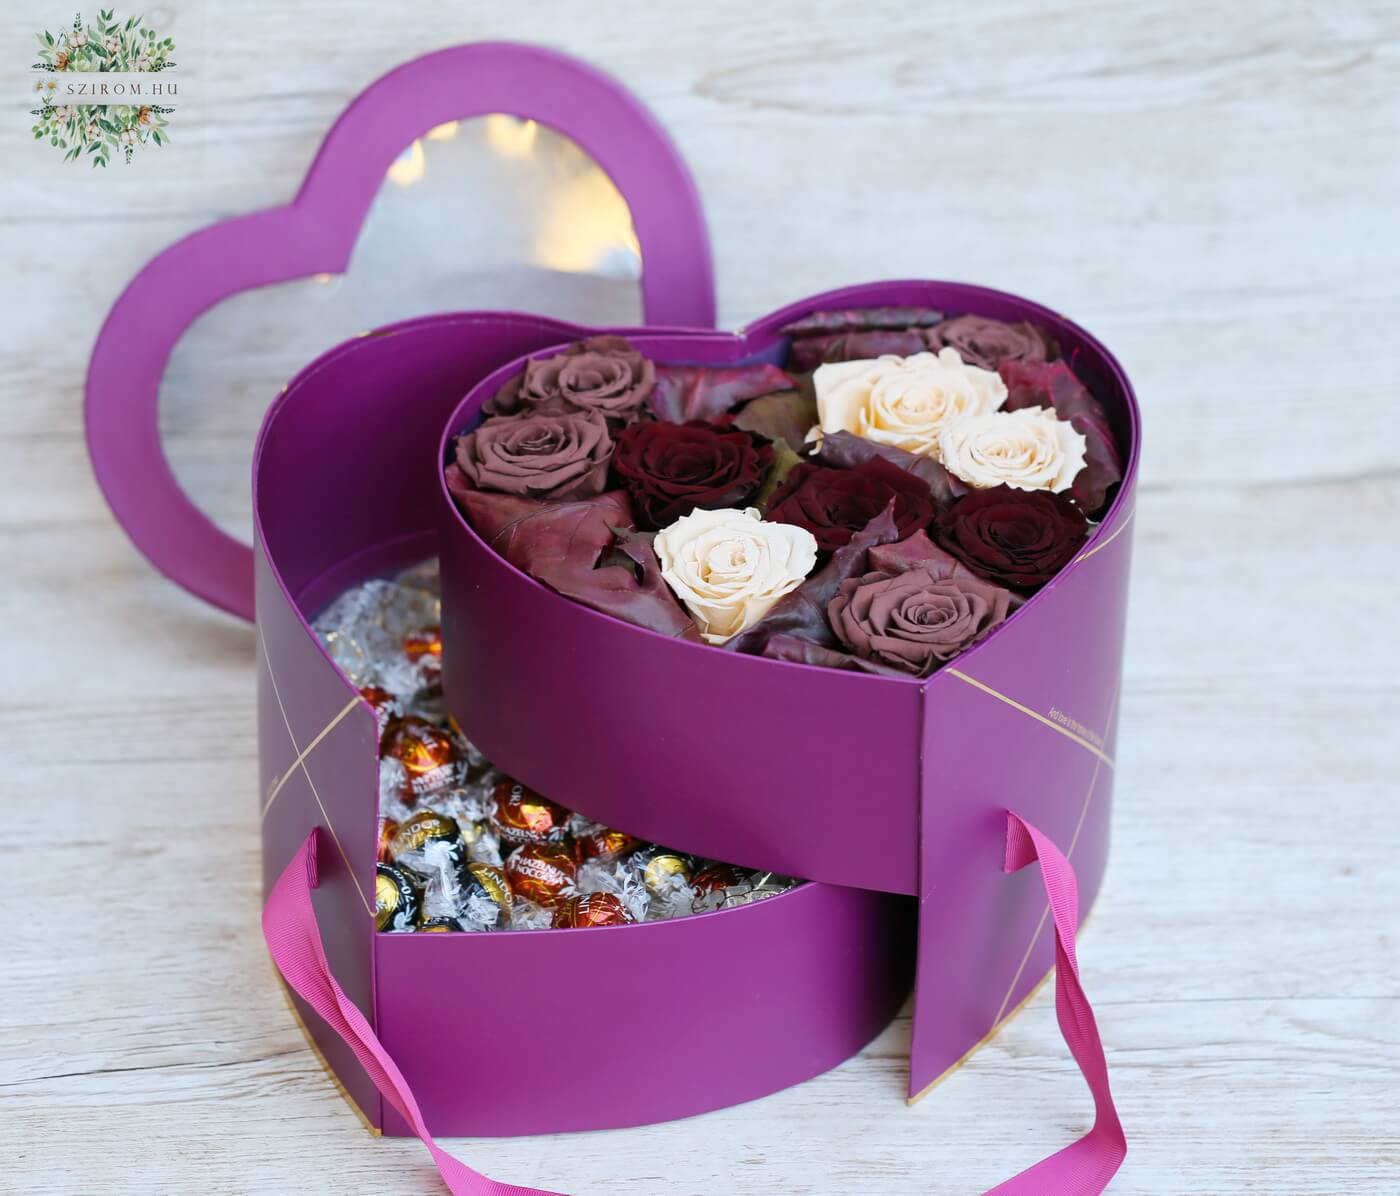 flower delivery Budapest - Forever rose heart box with lindt chocolate